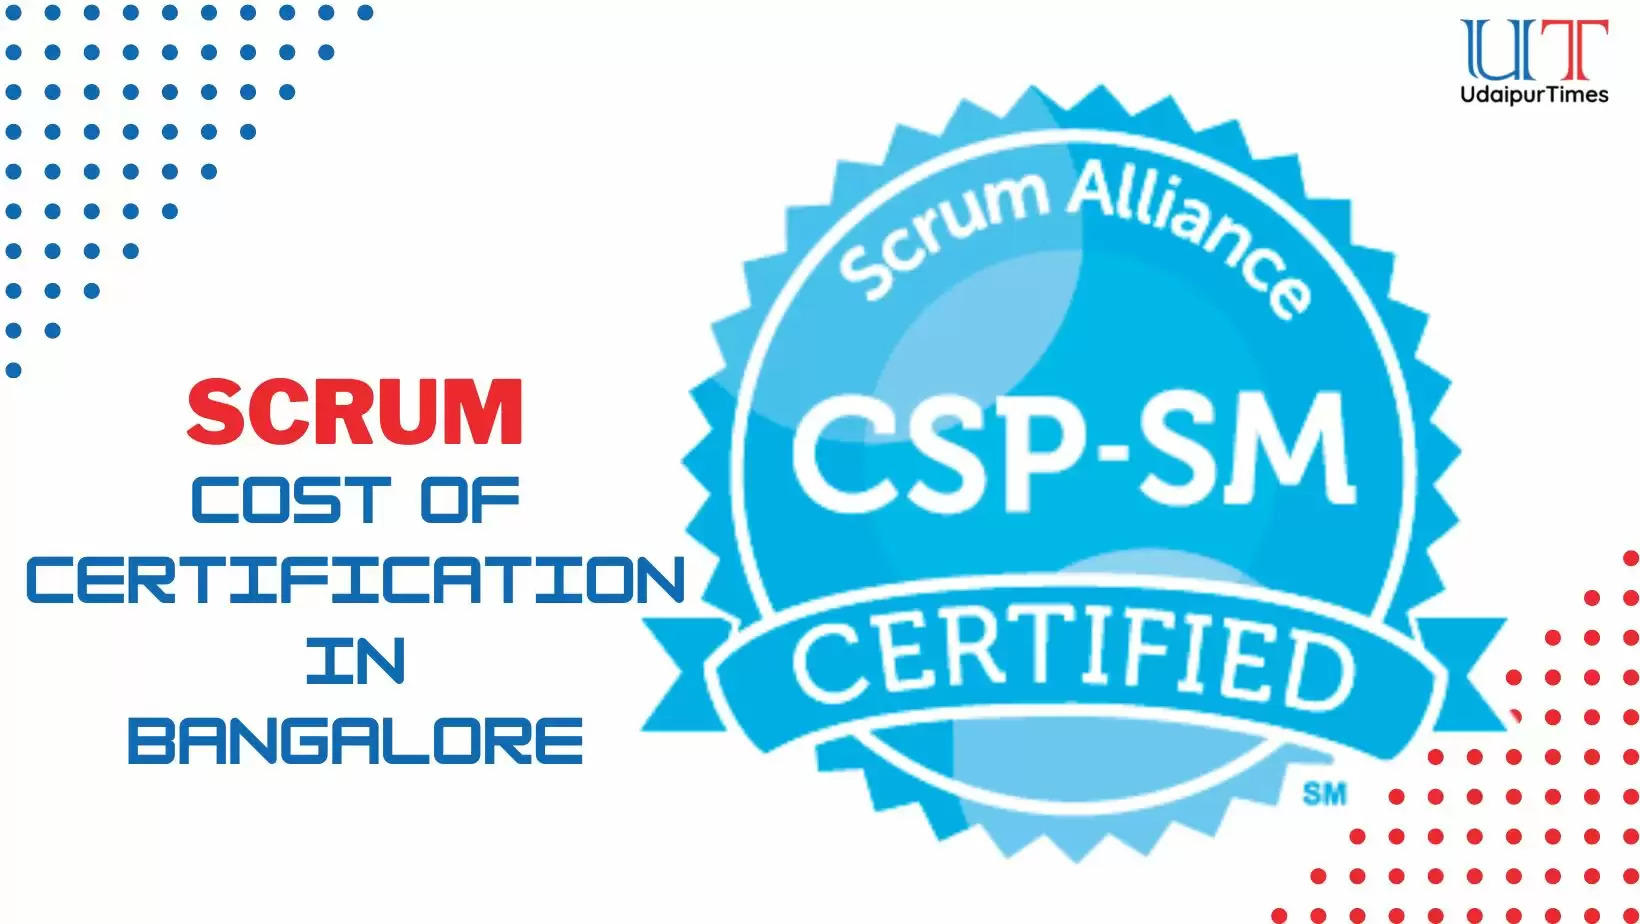 Scrum Master Cost of Certification in Bangalore